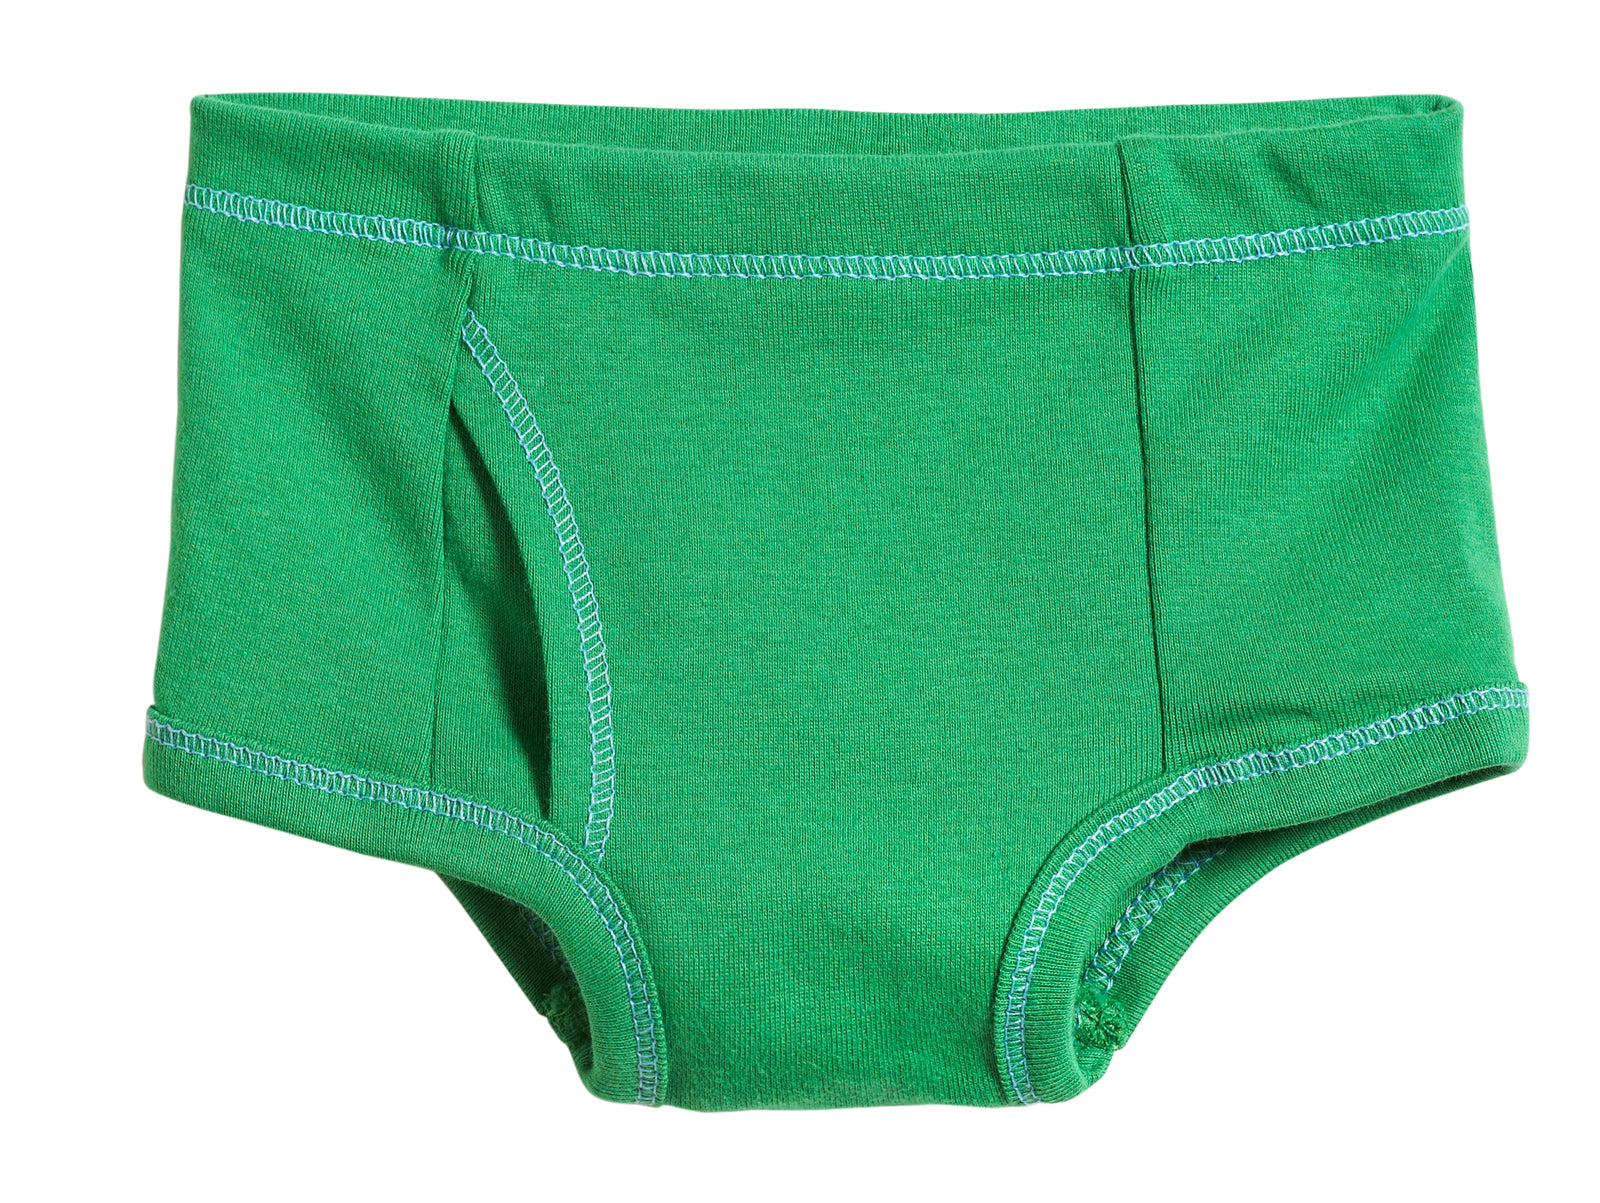 Comfort & softness in this organic underwear with sustainable